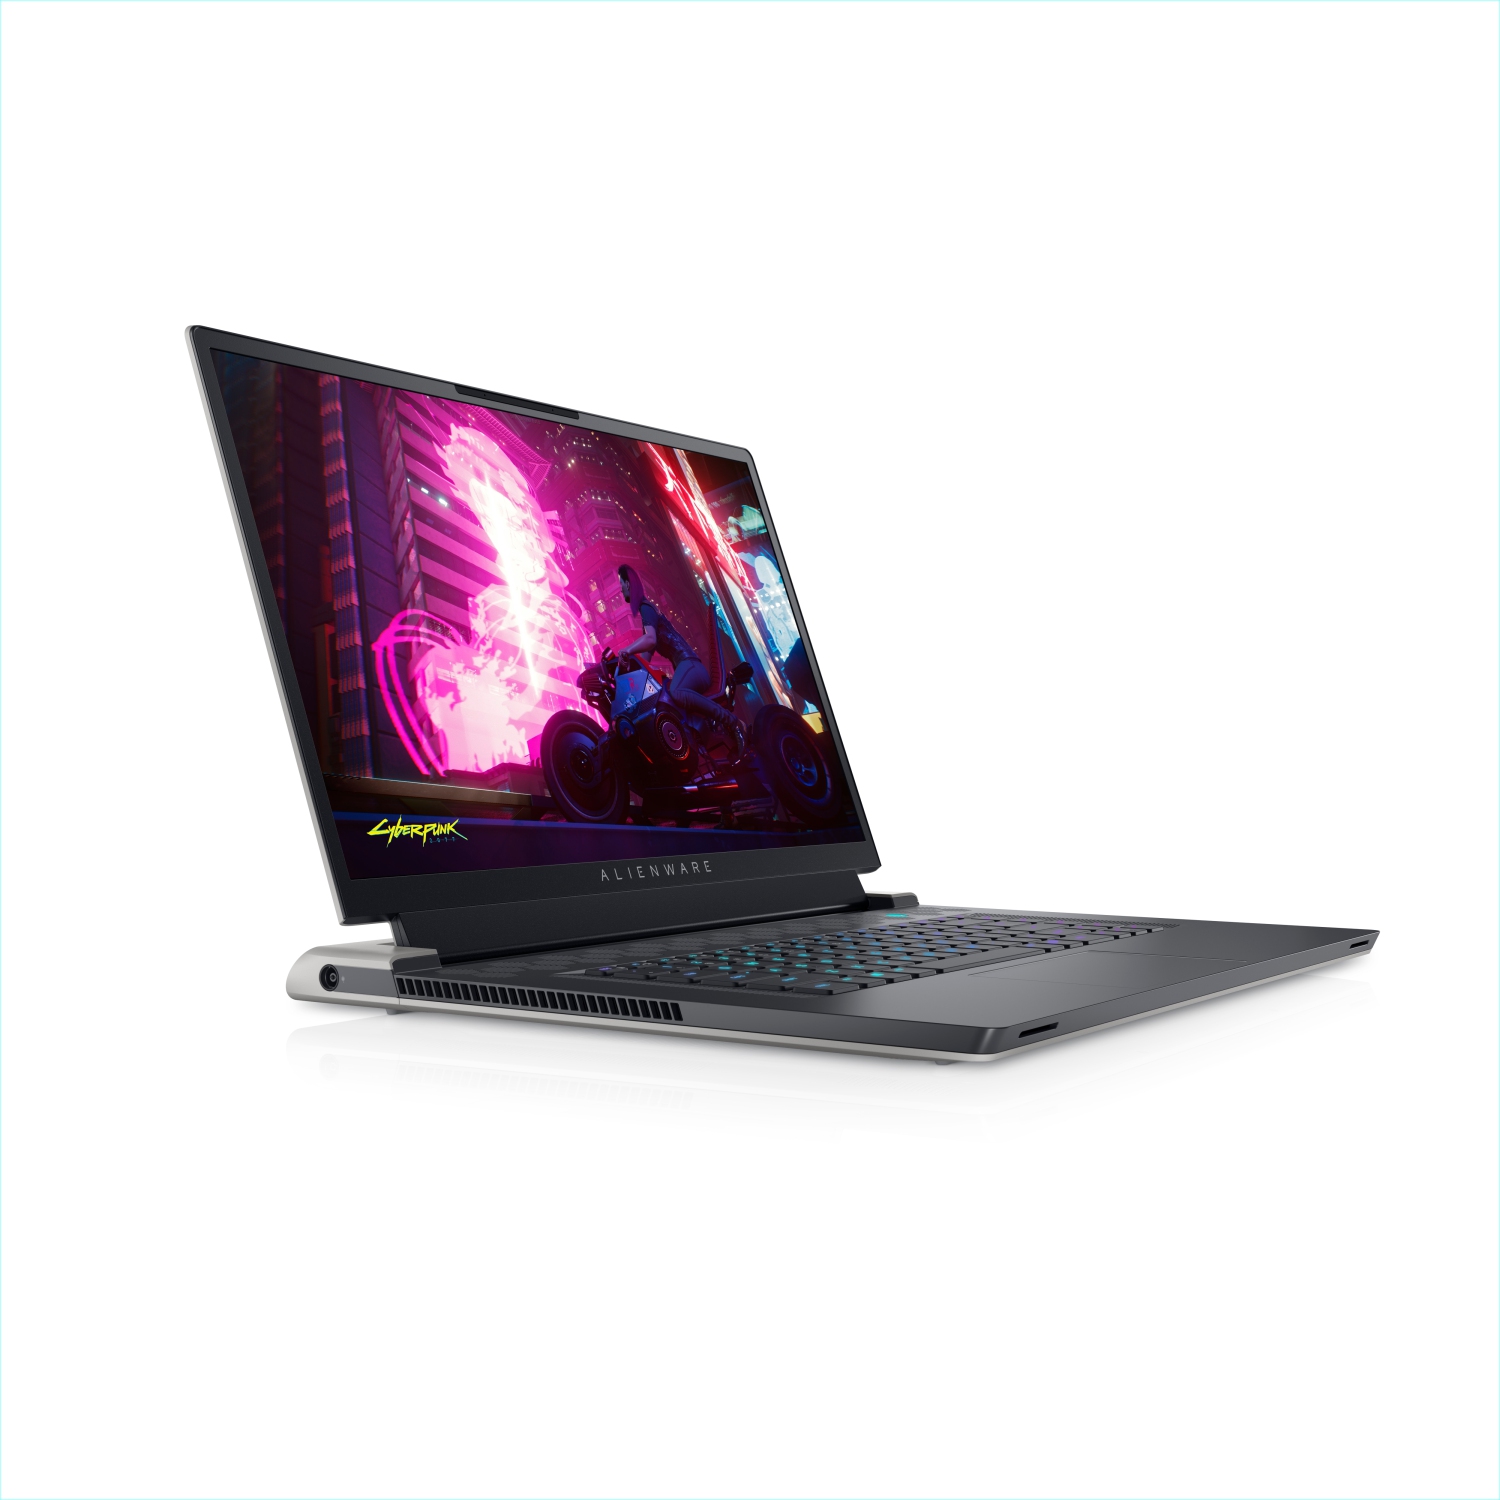 Refurbished (Excellent) - Dell Alienware X17 R1 Gaming Laptop (2021), 17.3" 4K, Core i7, 1TB SSD + 512GB SSD, 32GB RAM, RTX 3070, 4.6 GHz, 11th Gen CPU Certified